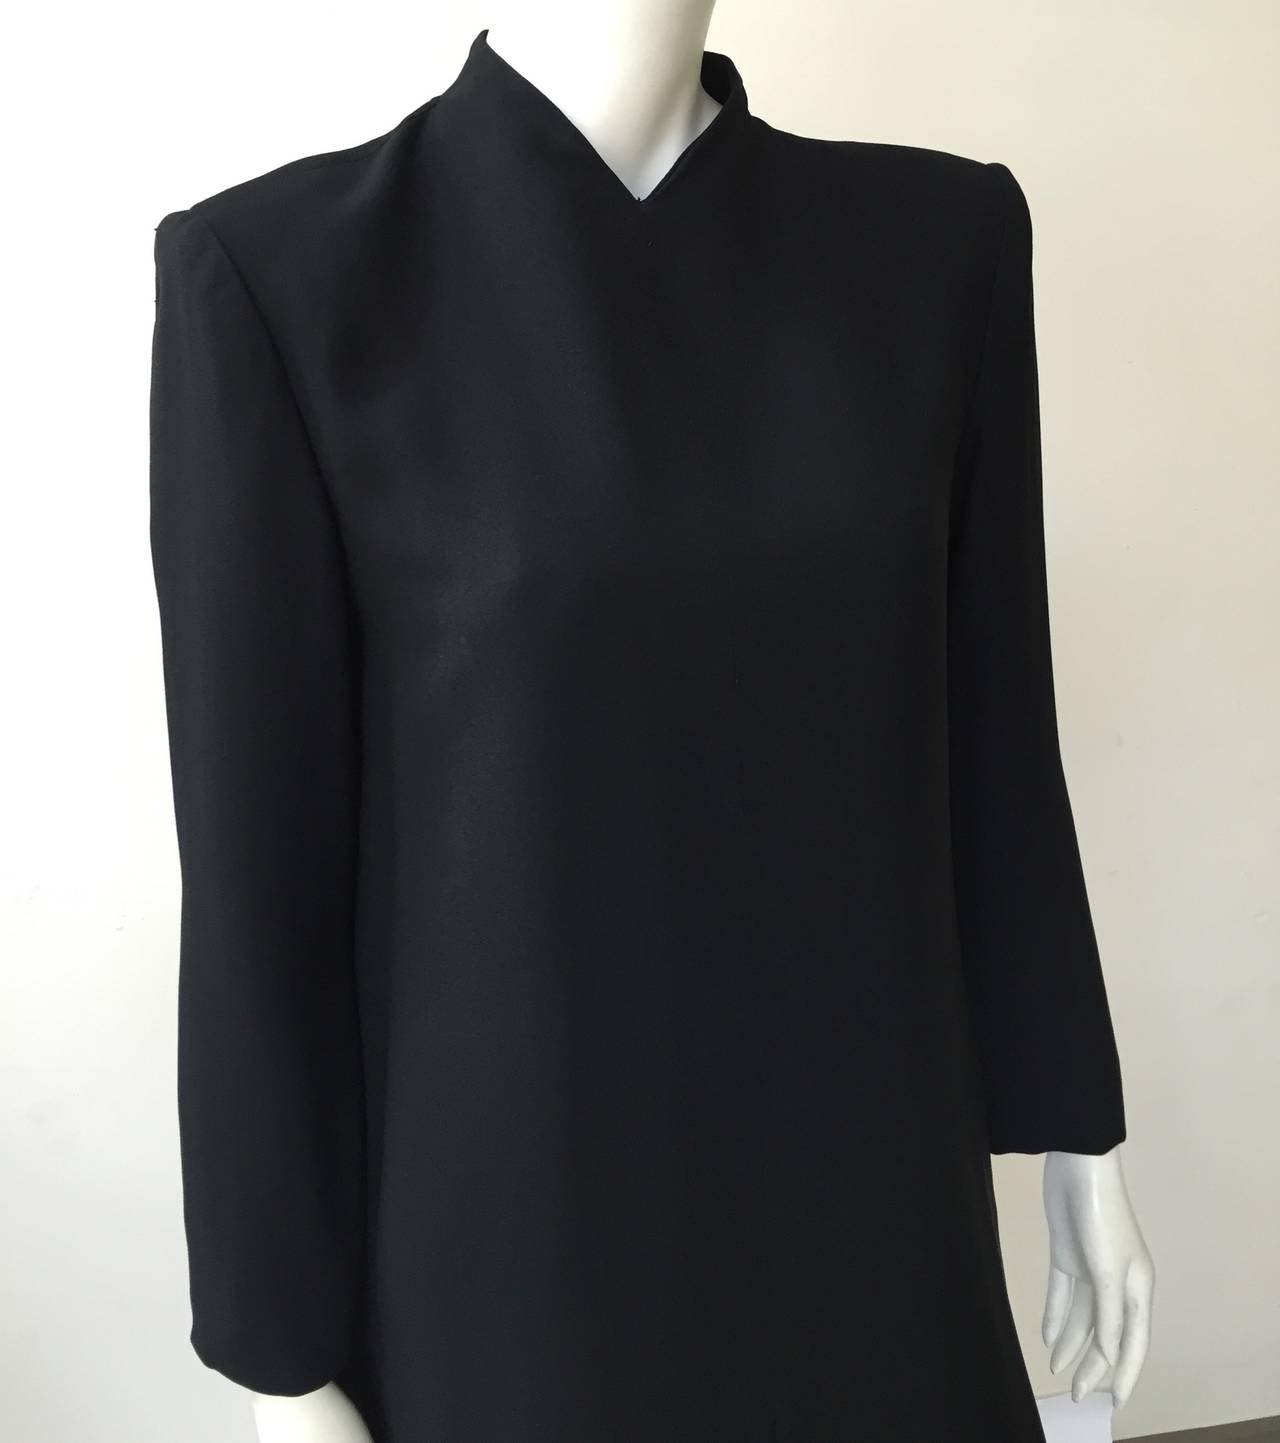 Travilla 70s minimal black layered wool dress size 12. Ladies please use your measuring tape so you can properly measure your bust, waist & hips to make certain this vintage treasure will fit you to perfection. 
Dress is lined.
Mild shoulder pads as